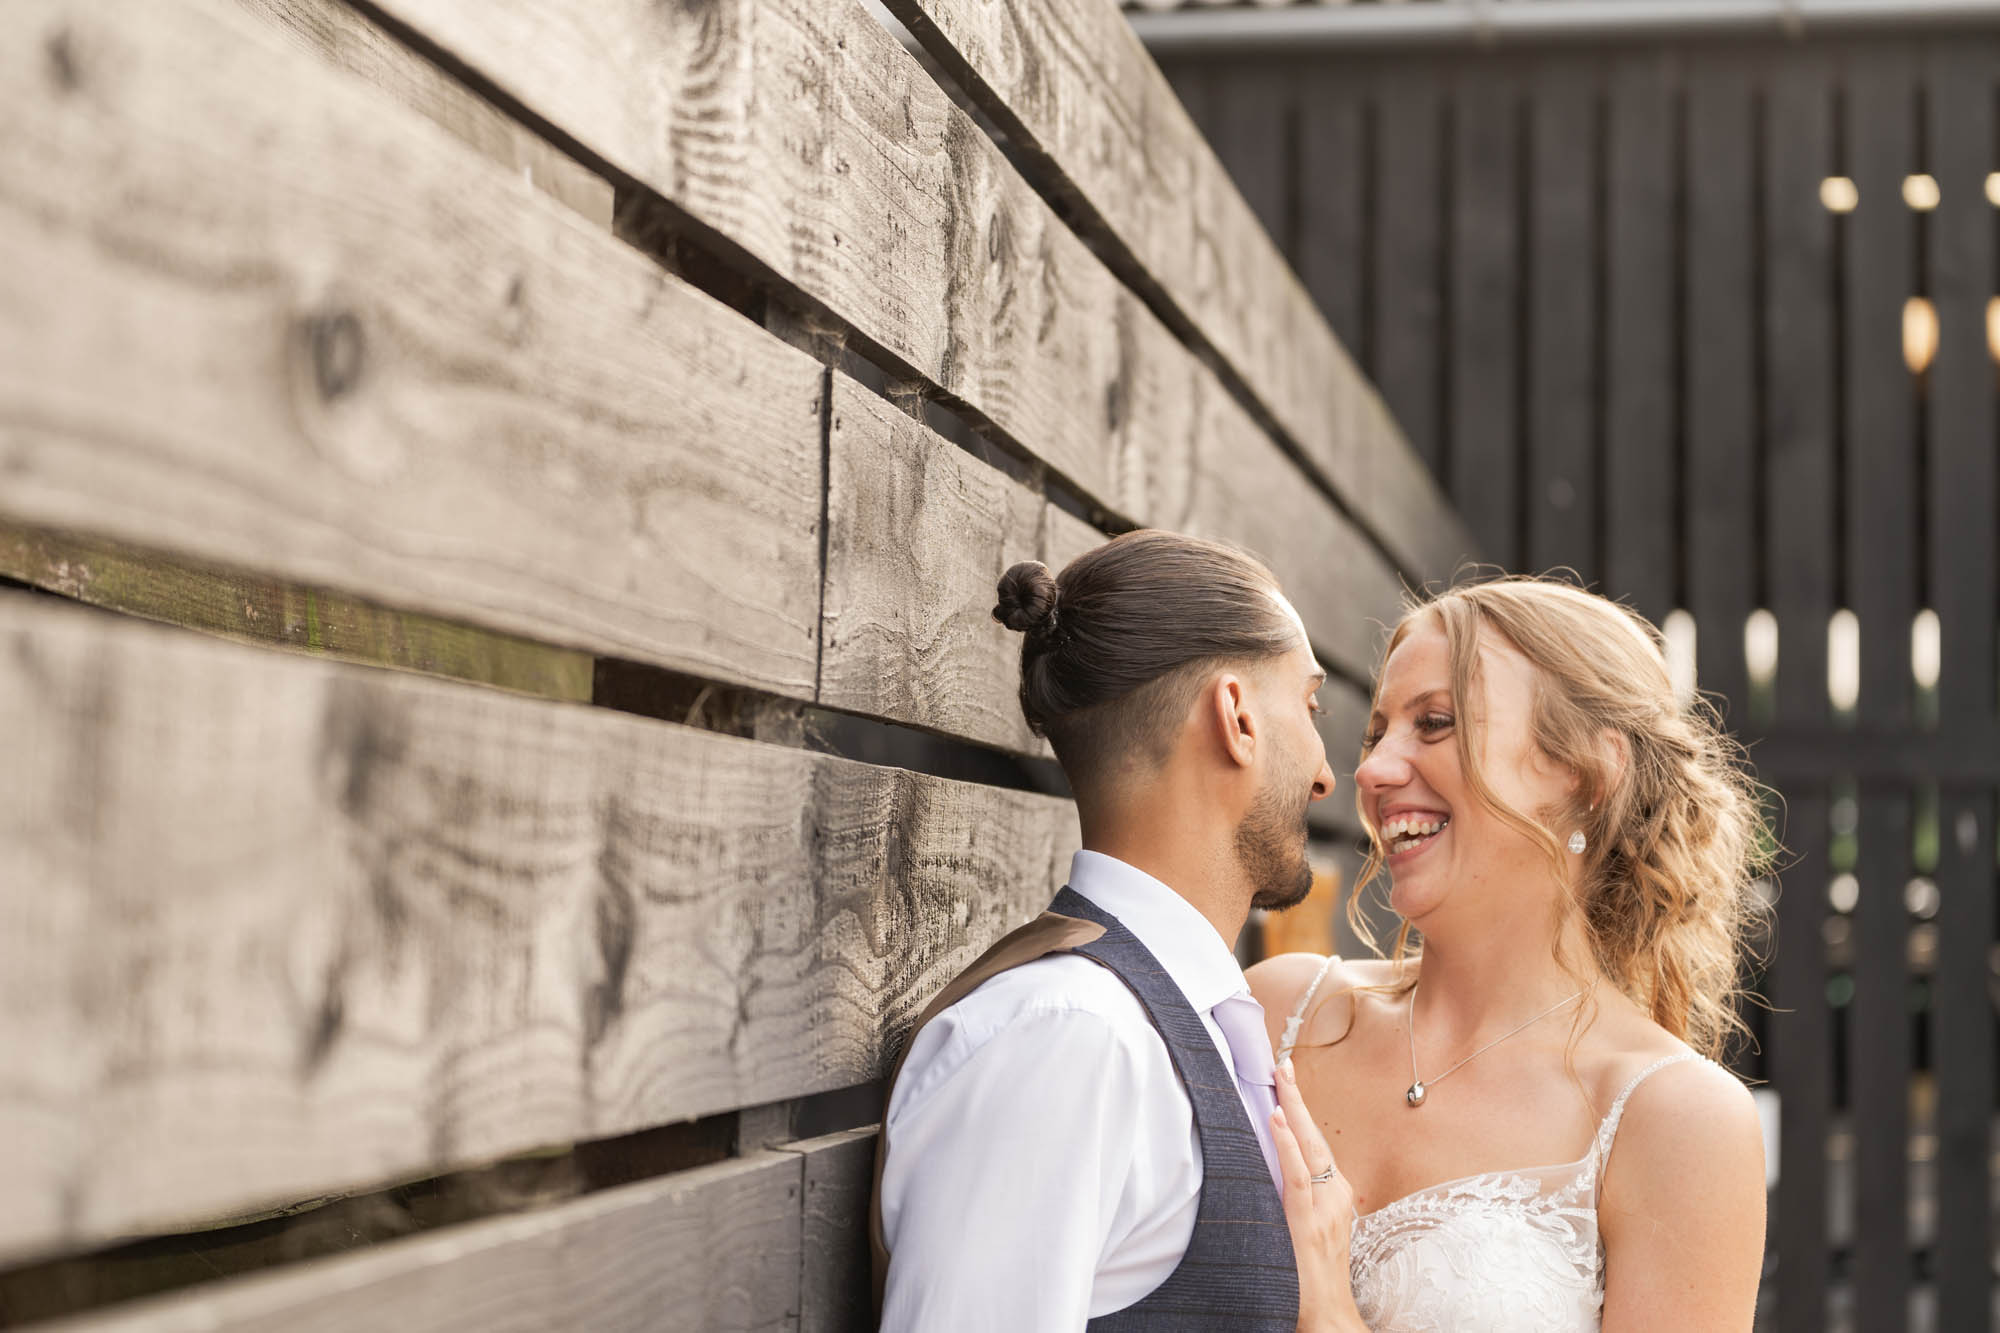 Real Wedding at Curradine Barns by Stephen Williams Photography